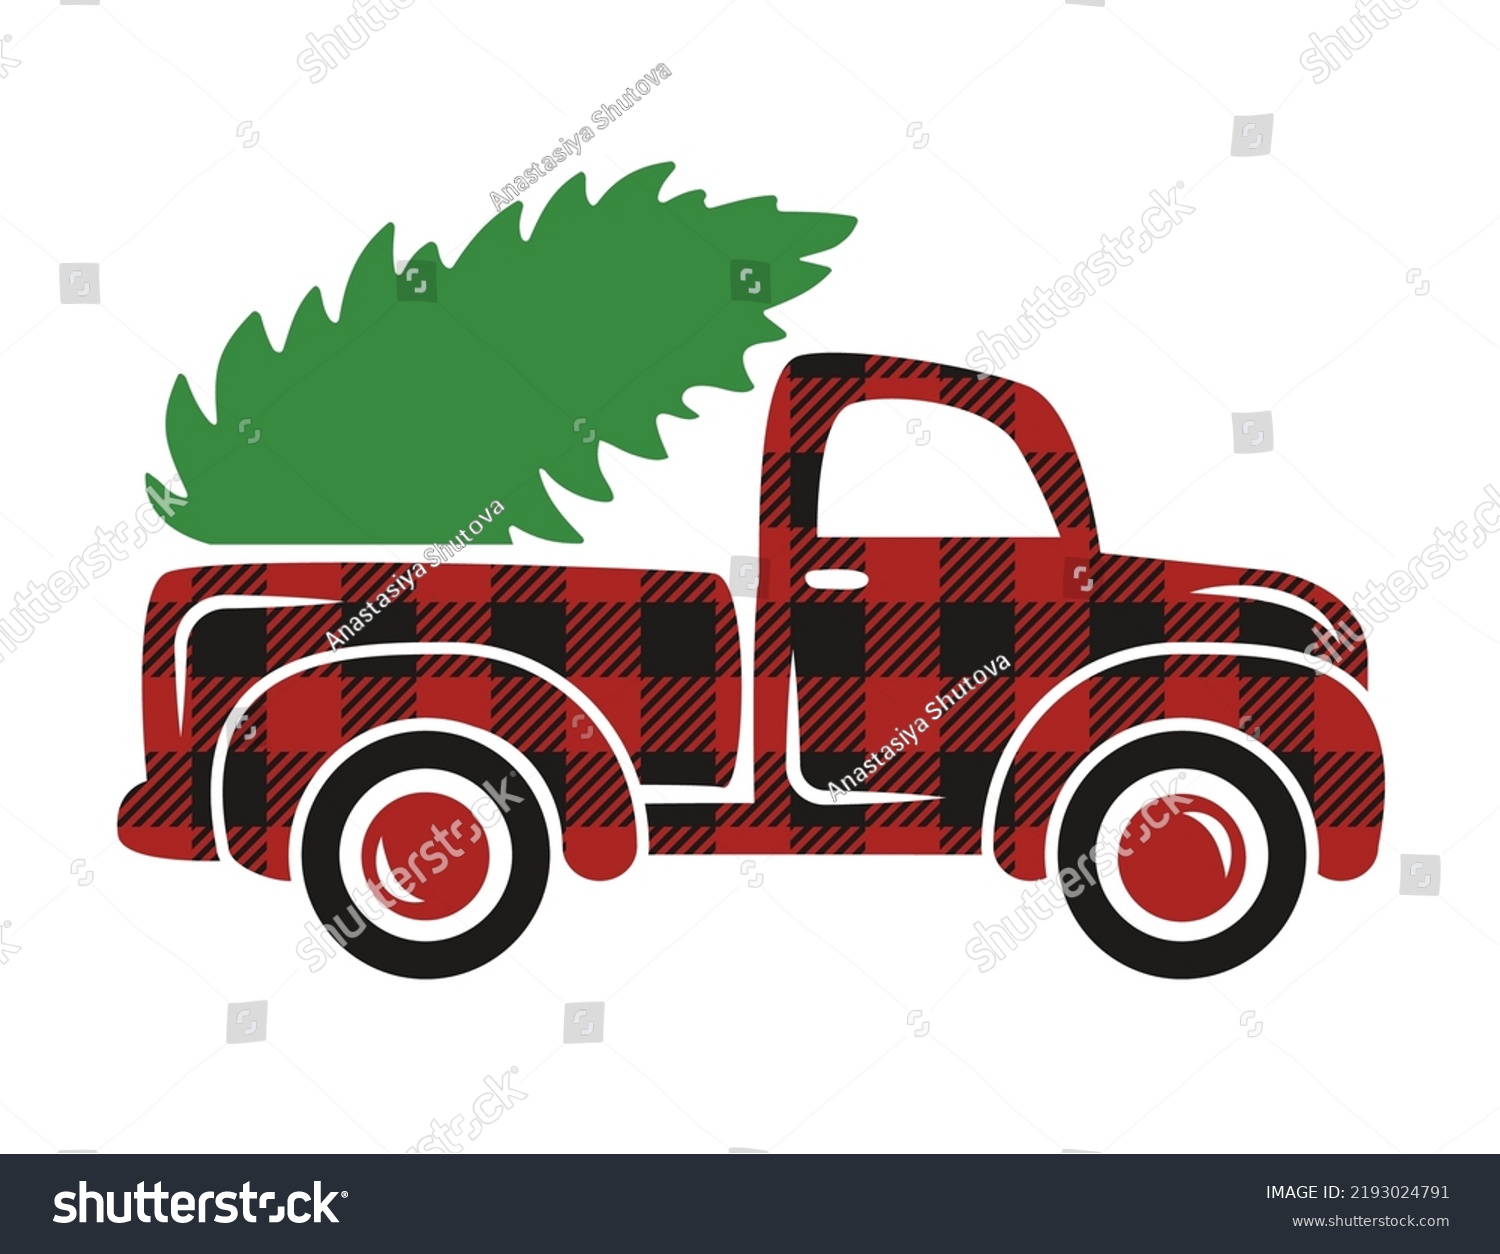 SVG of Cute Christmas truck Svg cutting file. Buffalo plaid old vintage truck carrying Christmas tree vector illustration (clipart). Christmas shirt design svg